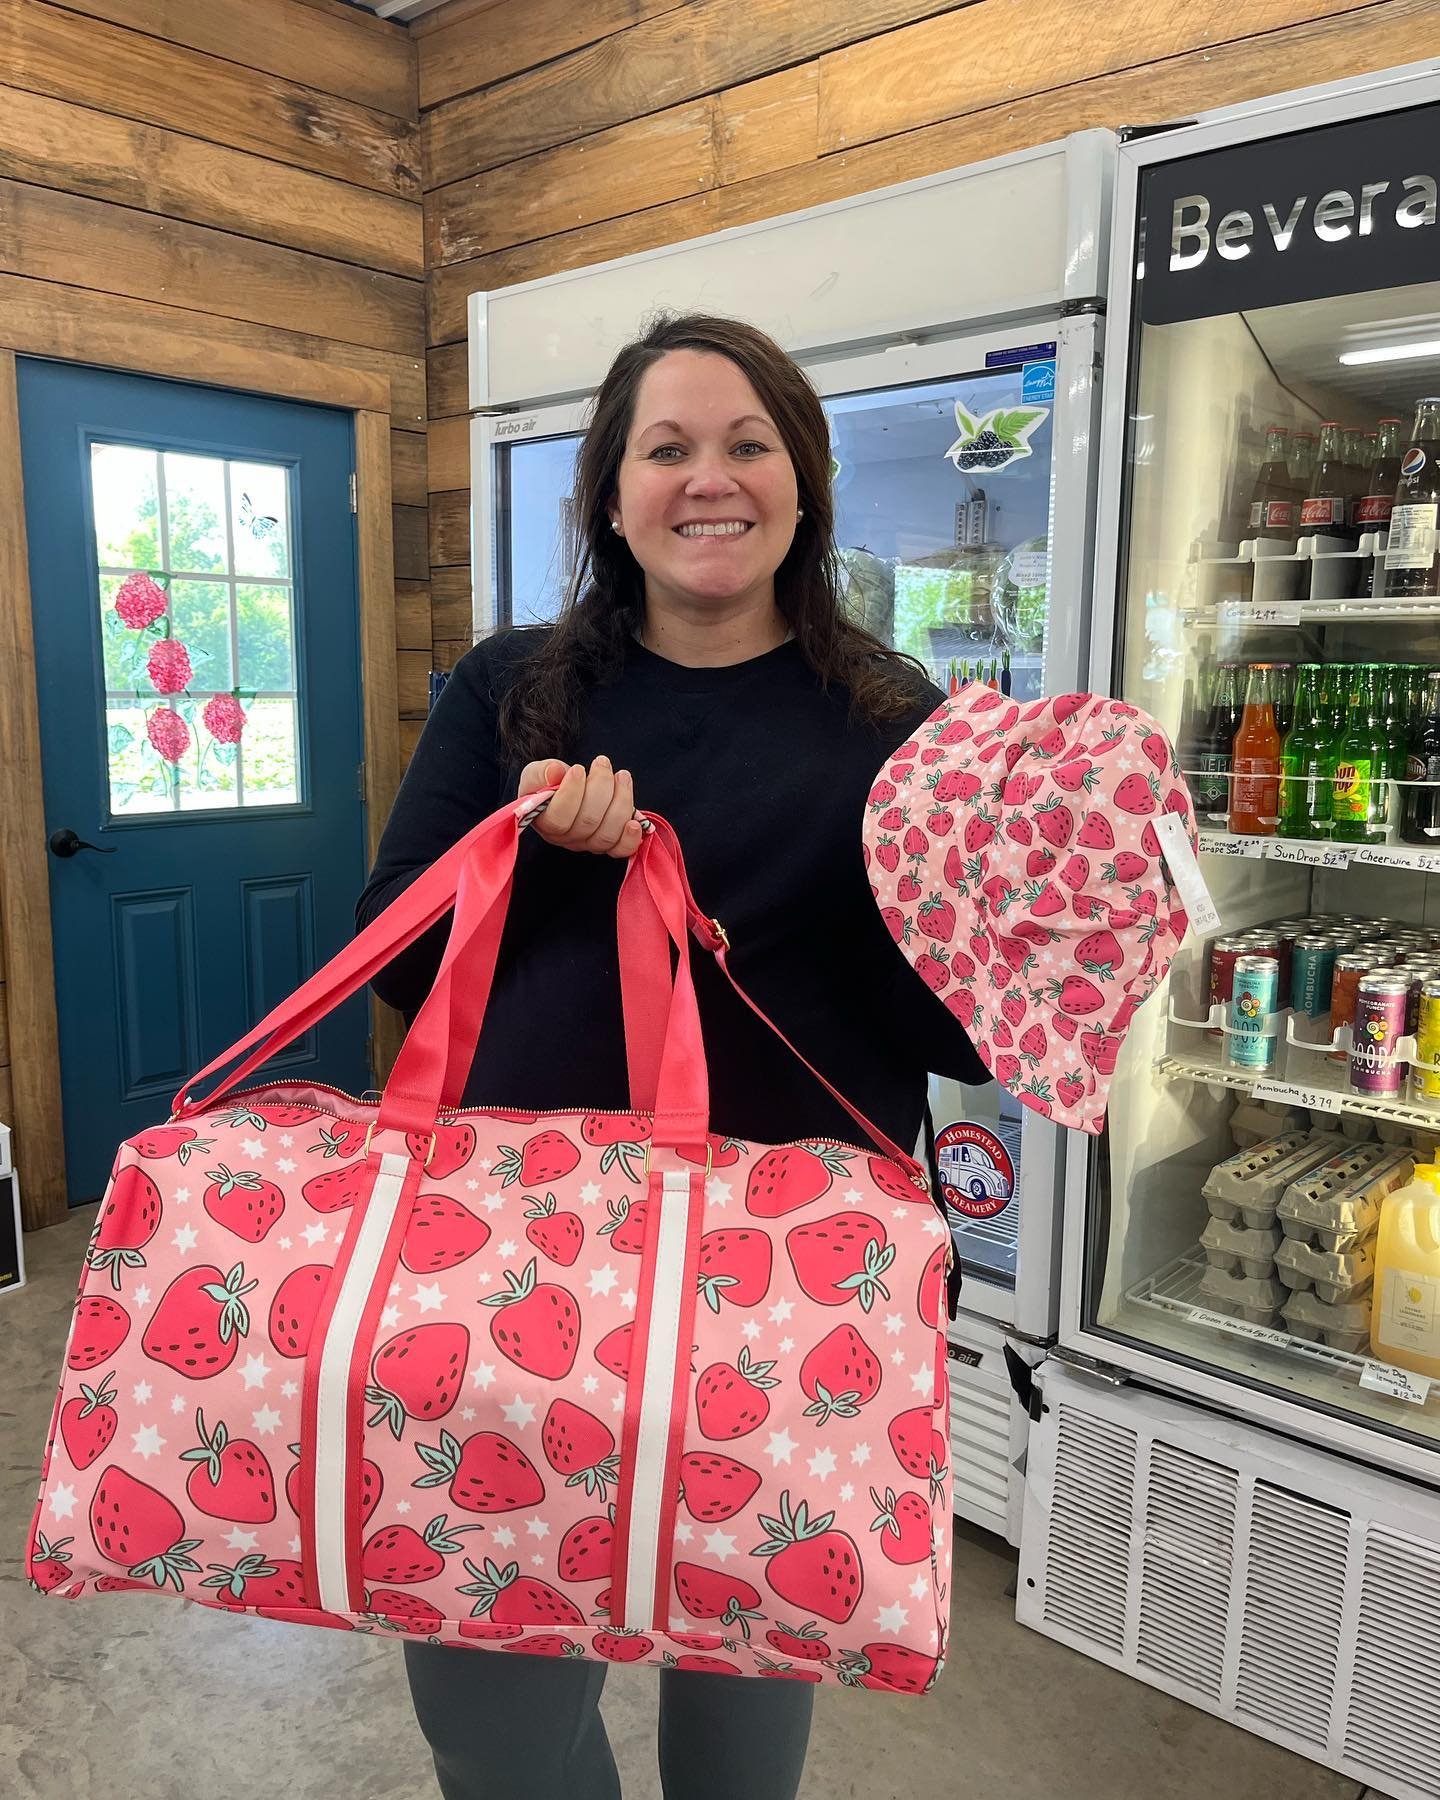 Want to win this strawberry swag bag?? 

Join our Then &amp; Now photo contest challenge to help us celebrate our 30th strawberry crop this year!

Throughout the month of April, we want you to find the oldest photo you have that was taken of you and 